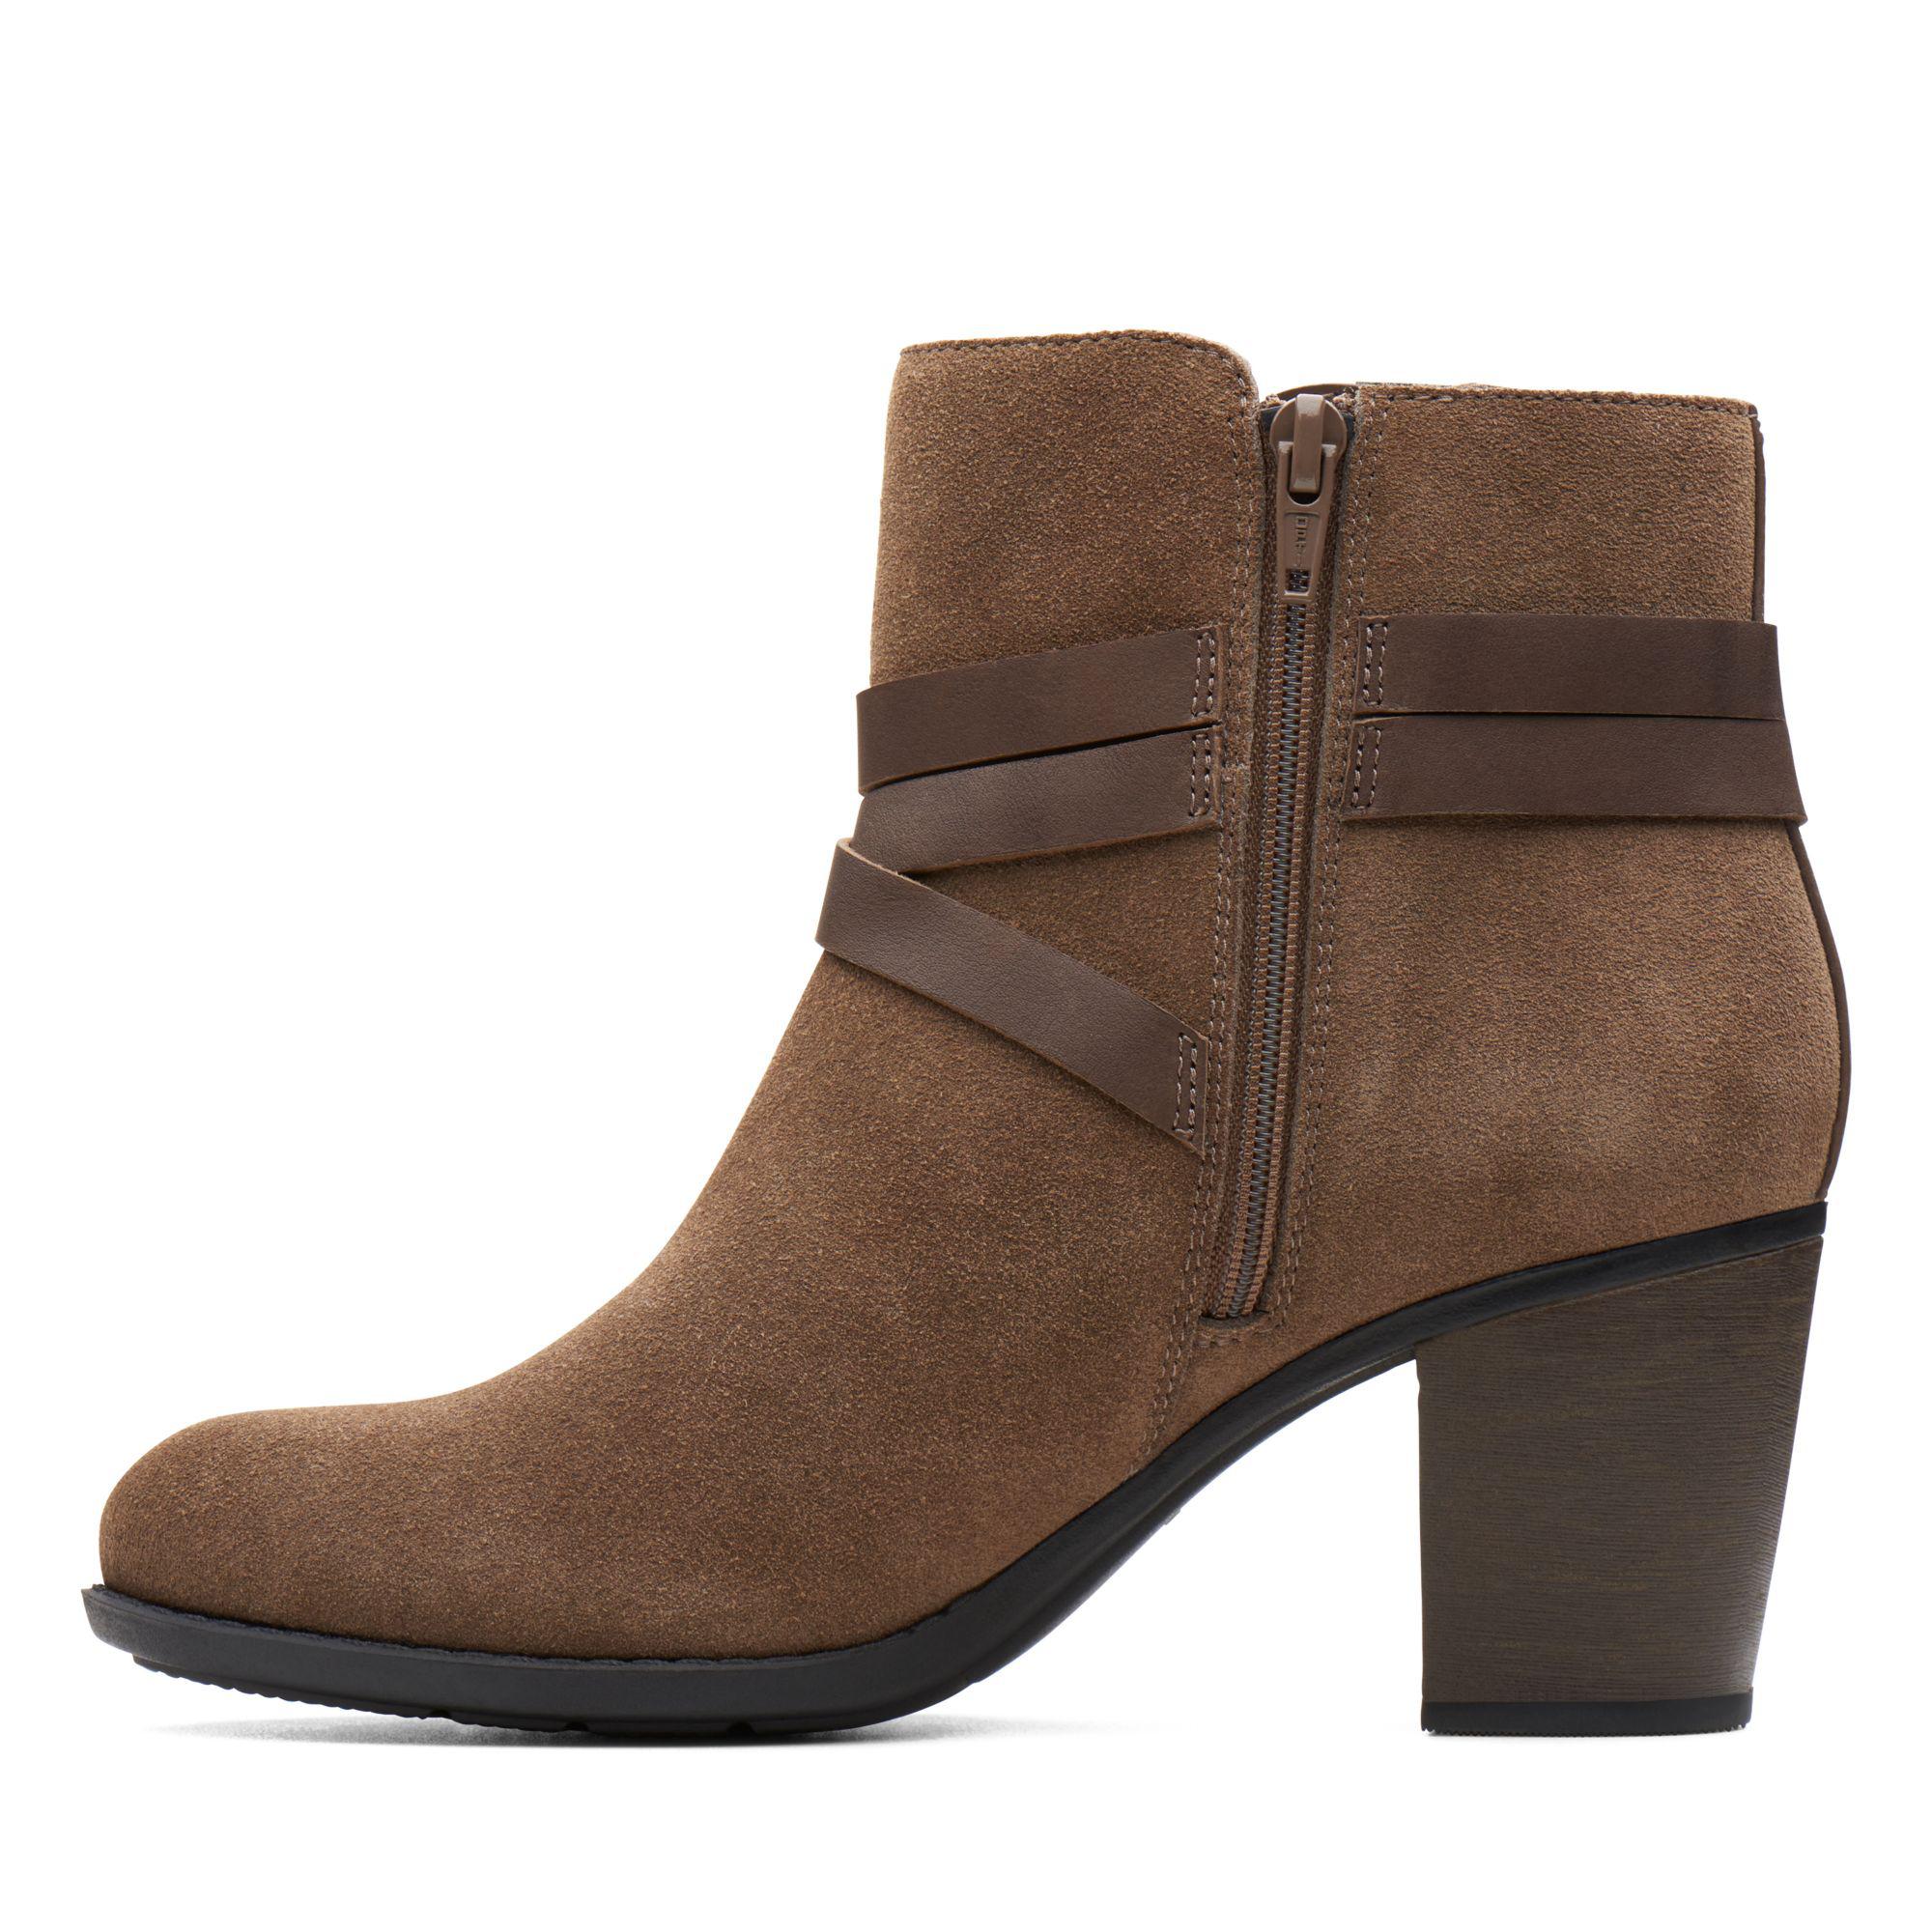 Clarks Enfield Coco Boots Discount, SAVE 54%.